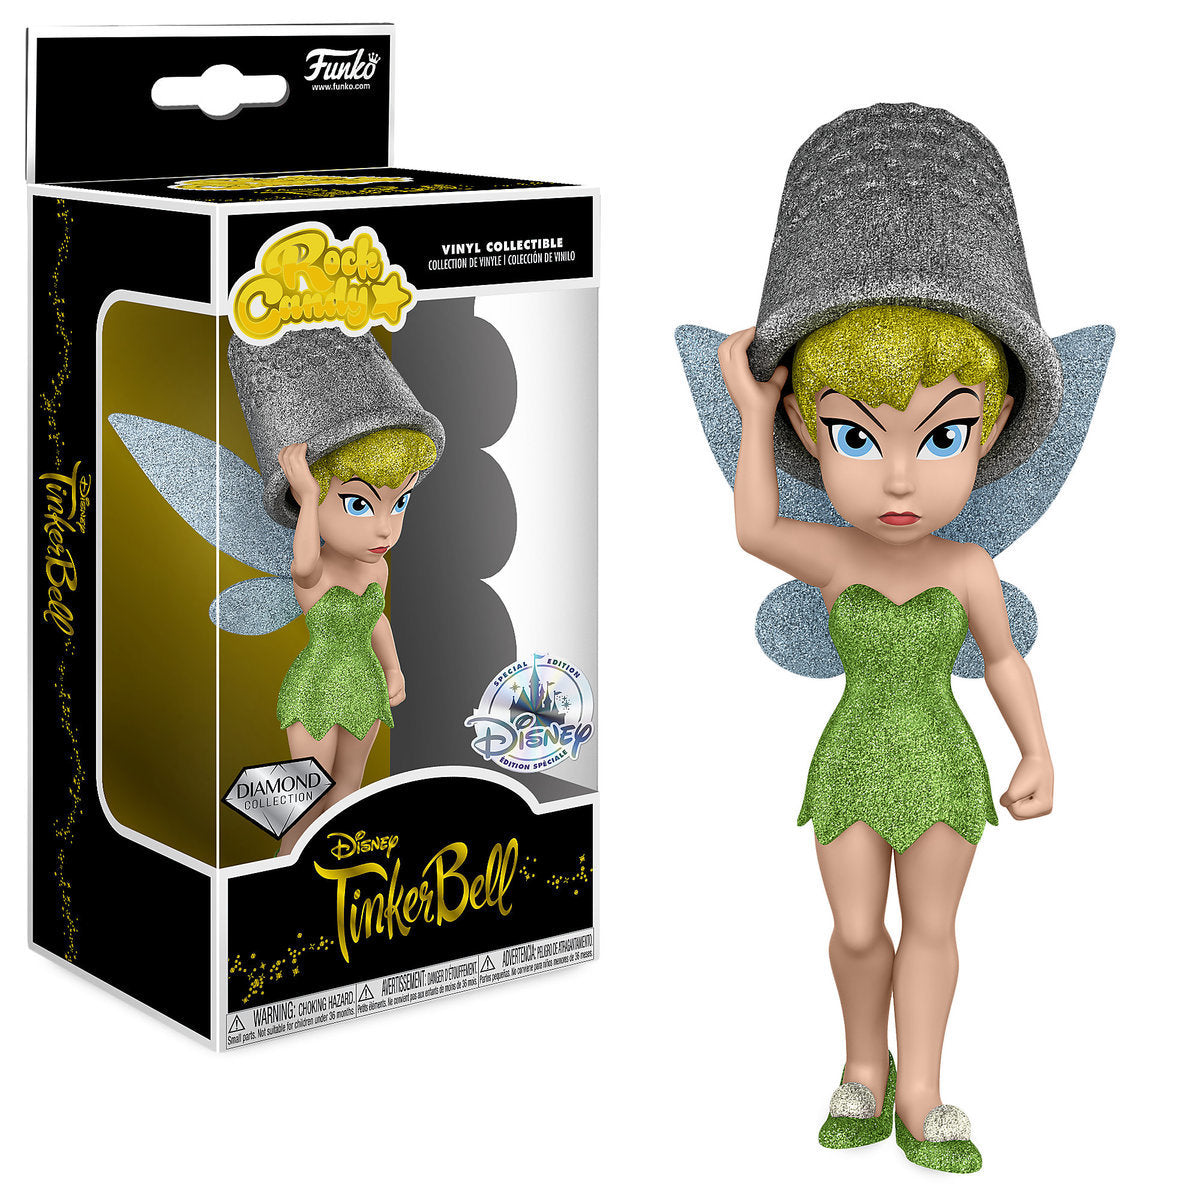 Disney Tinker Bell Vinyl Figure Rock Candy Vinyl Collectible New with Box